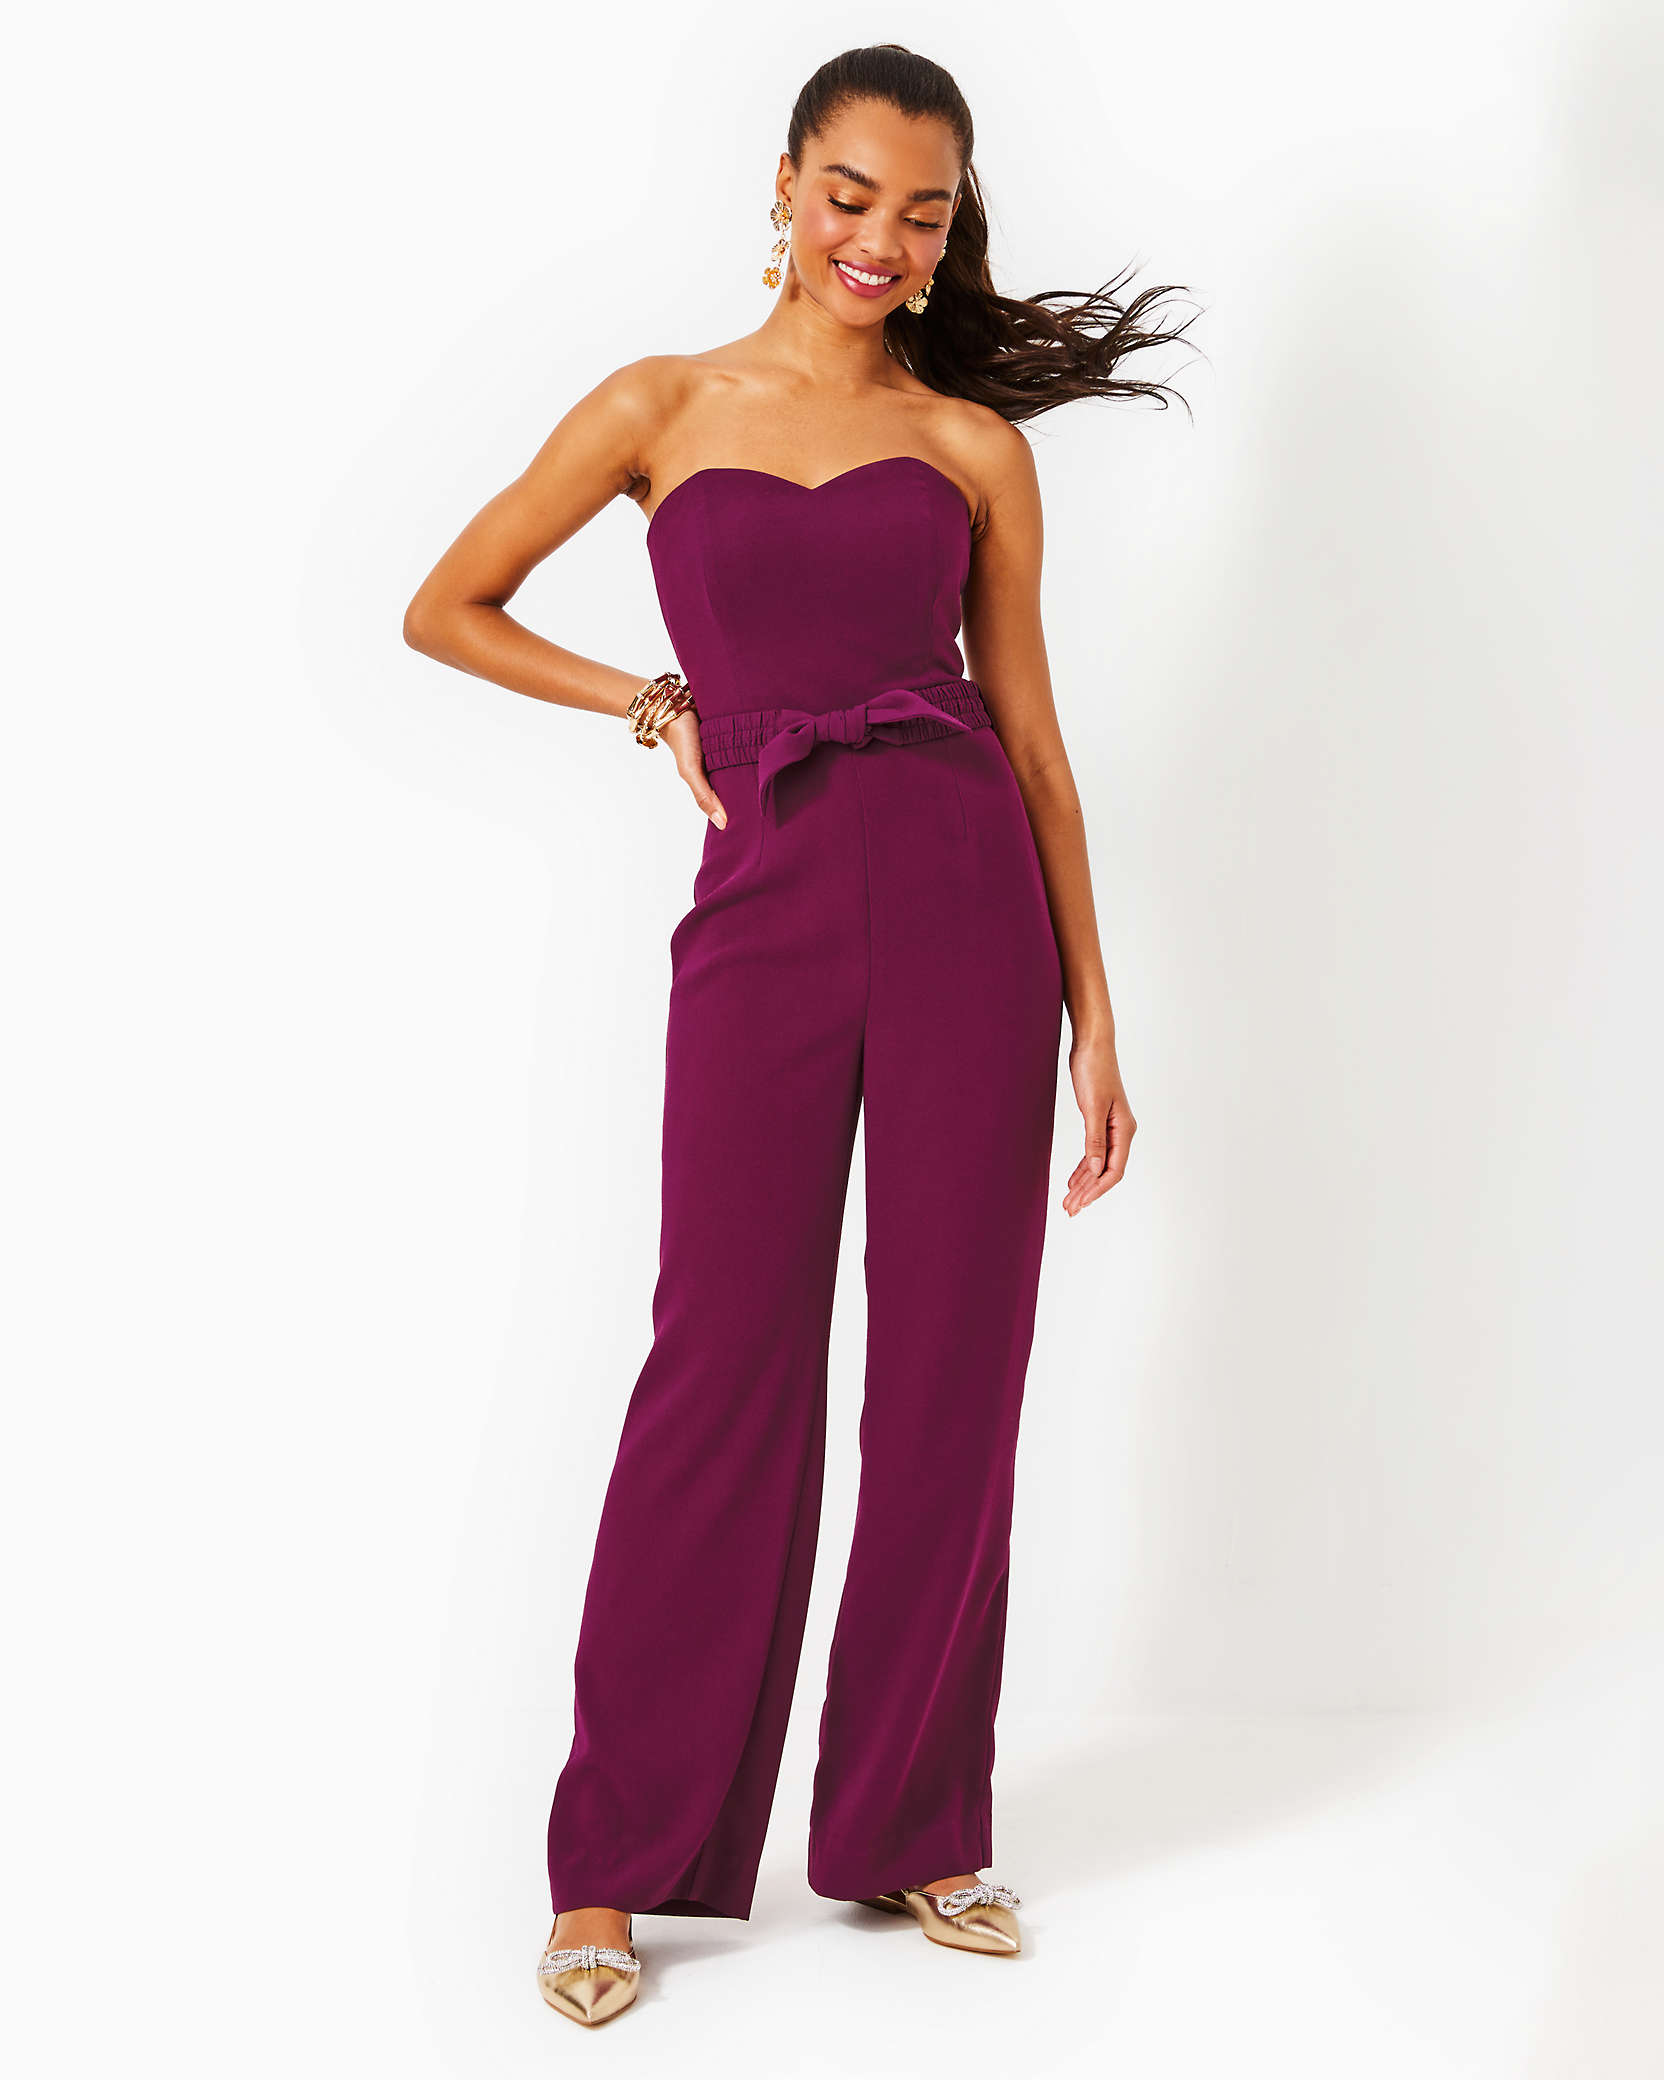 LILLY PULITZER ROSALIE STRAPLESS JUMPSUIT